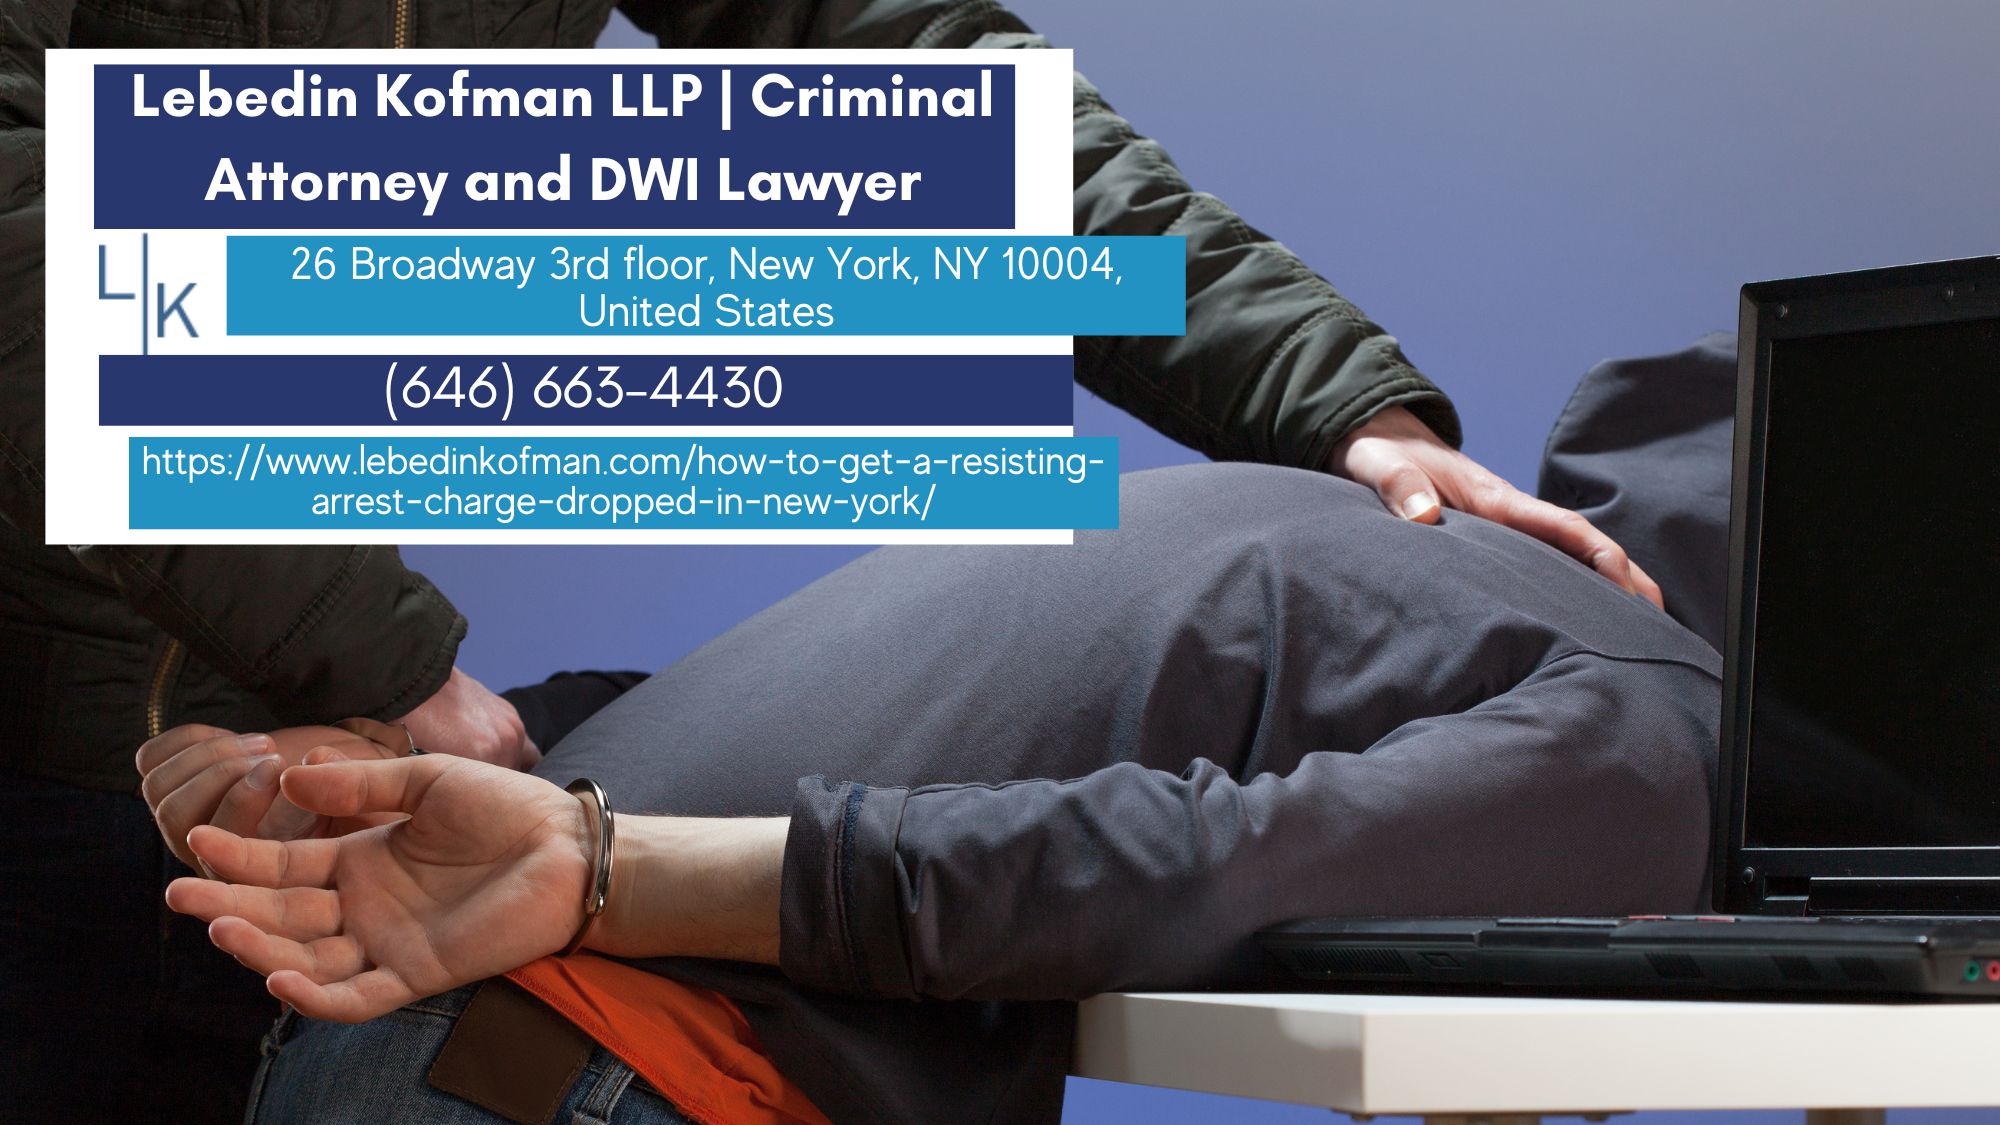 New York Criminal Defense Lawyer Russ Kofman Releases Article on How to Get a Resisting Arrest Charge Dropped